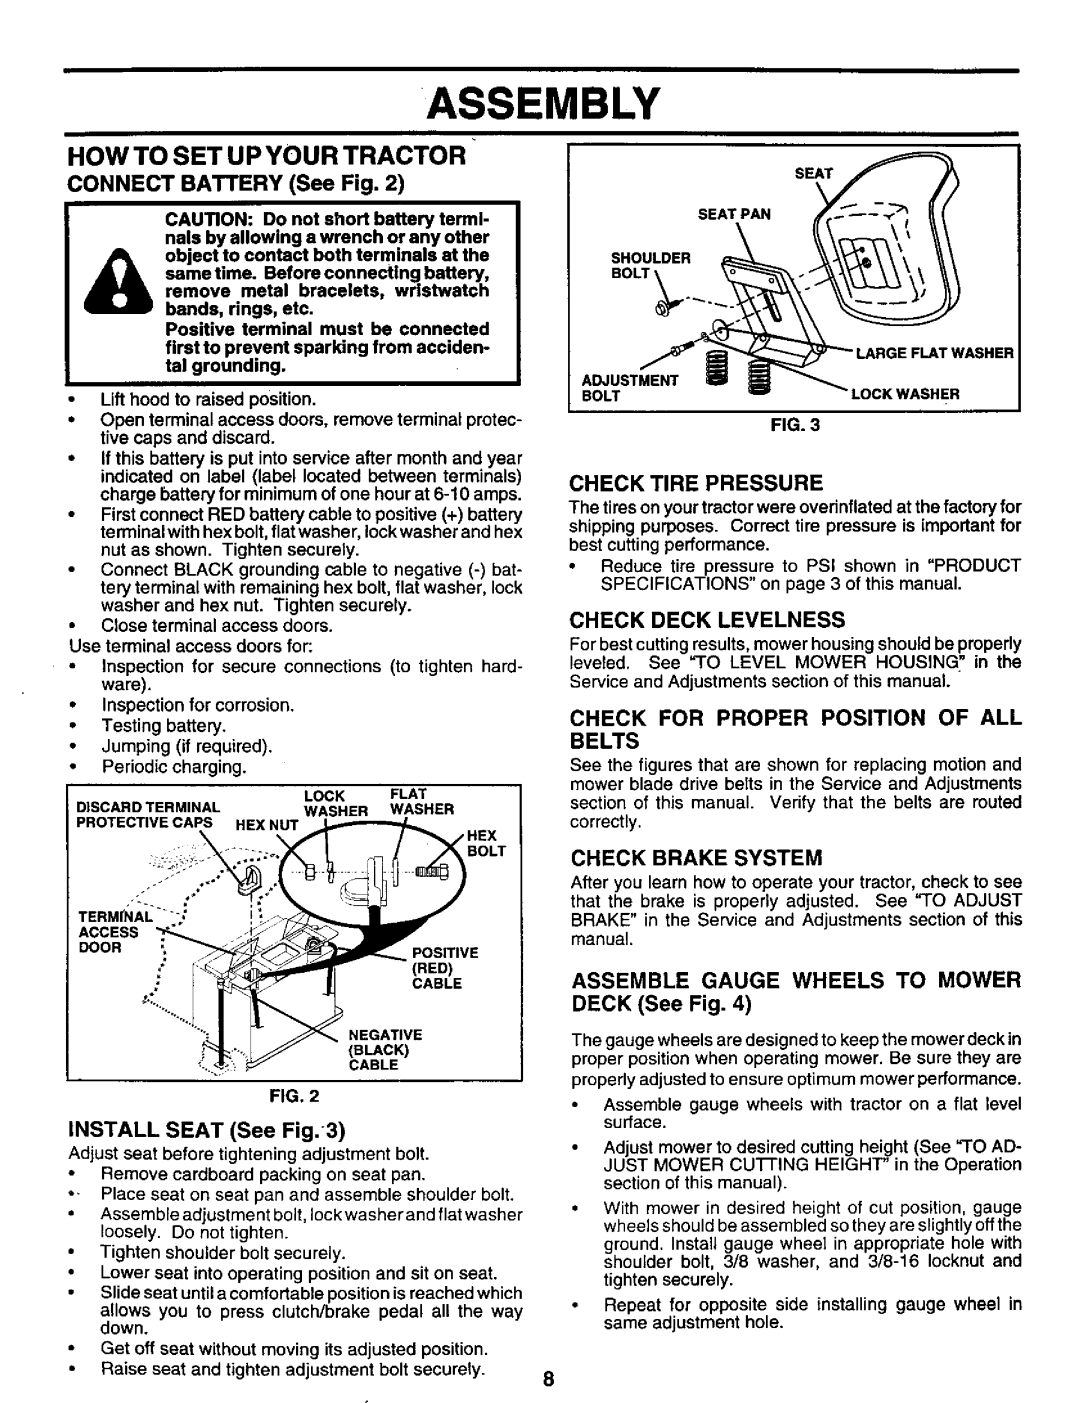 Craftsman 917.259561 owner manual How To Set Up Your Tractor, CONNECT BATTERY See Fig, Check Deck Levelness, Assembly 